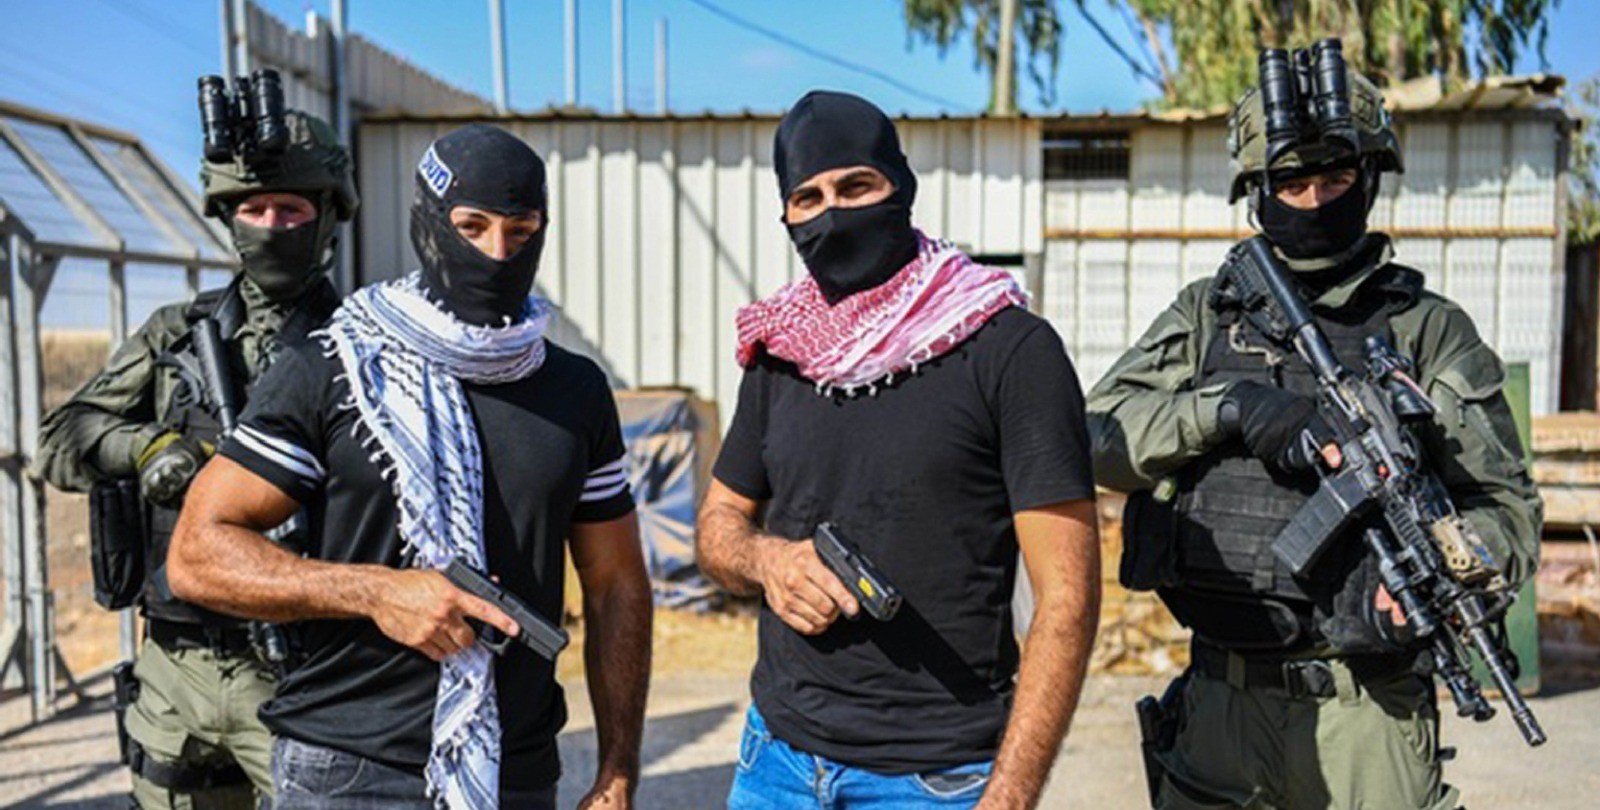 Members of one of Israel's police undercover "Mista'aravim" units